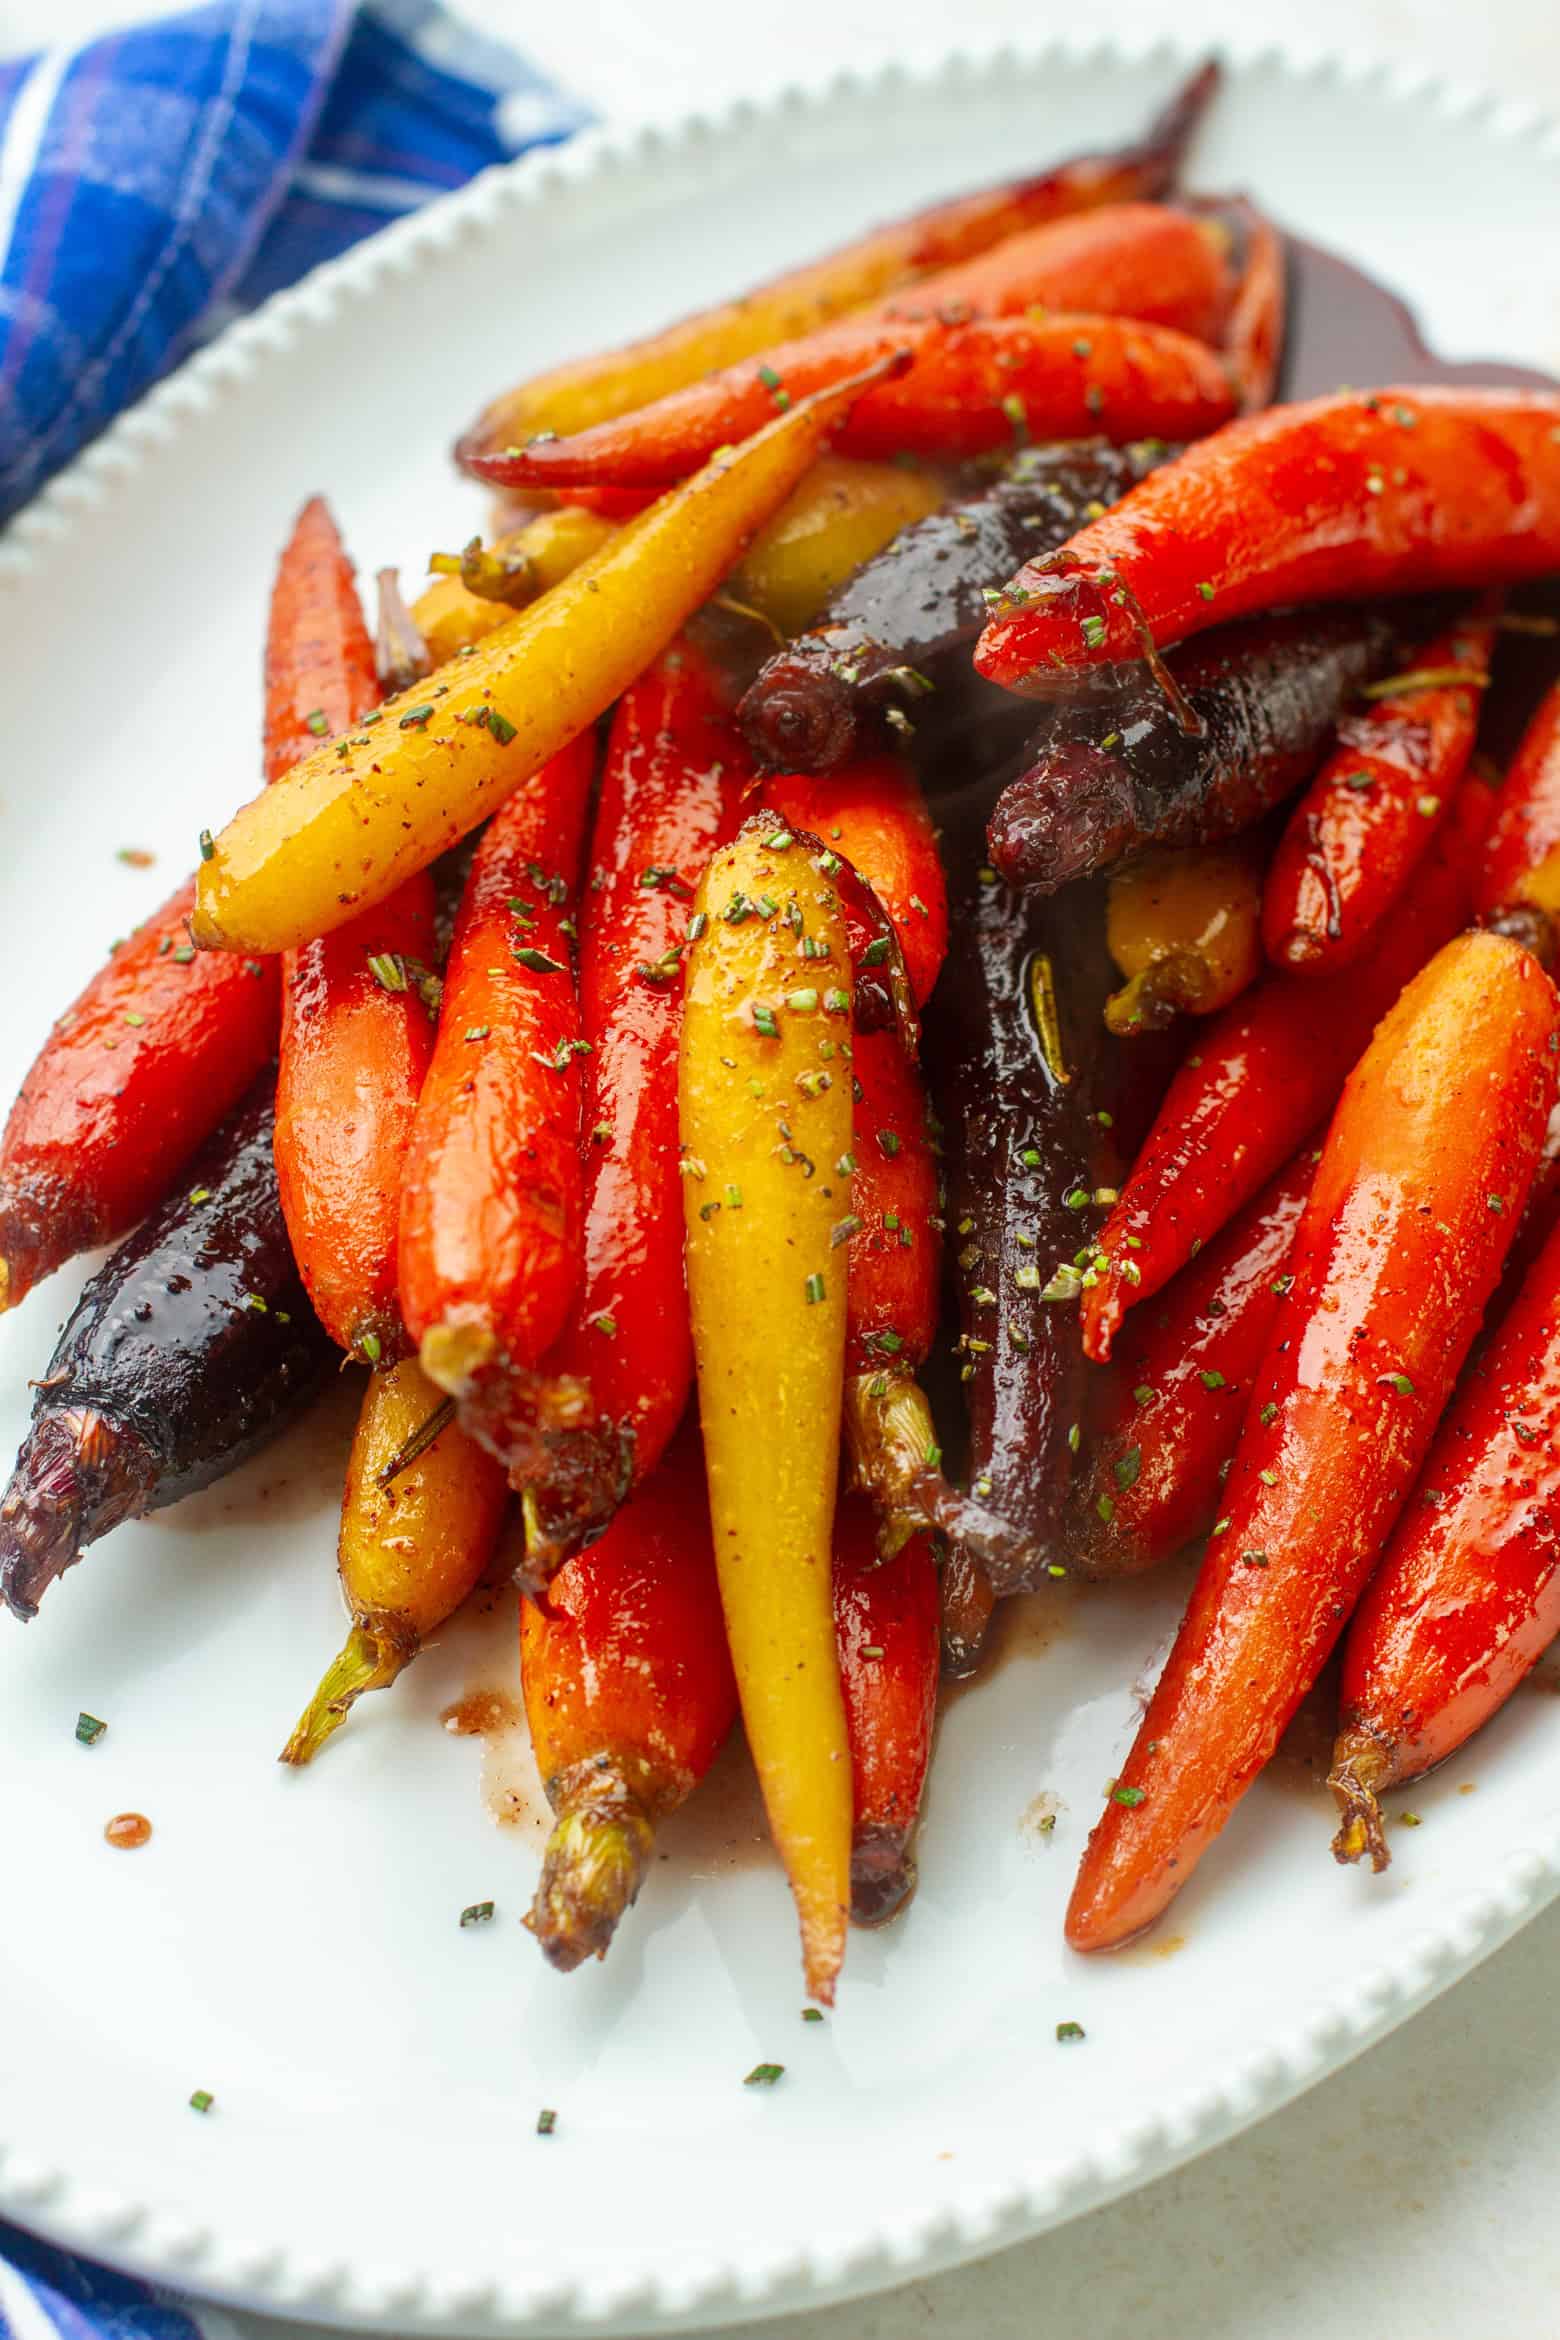 Sauteed Carrots on a platter.